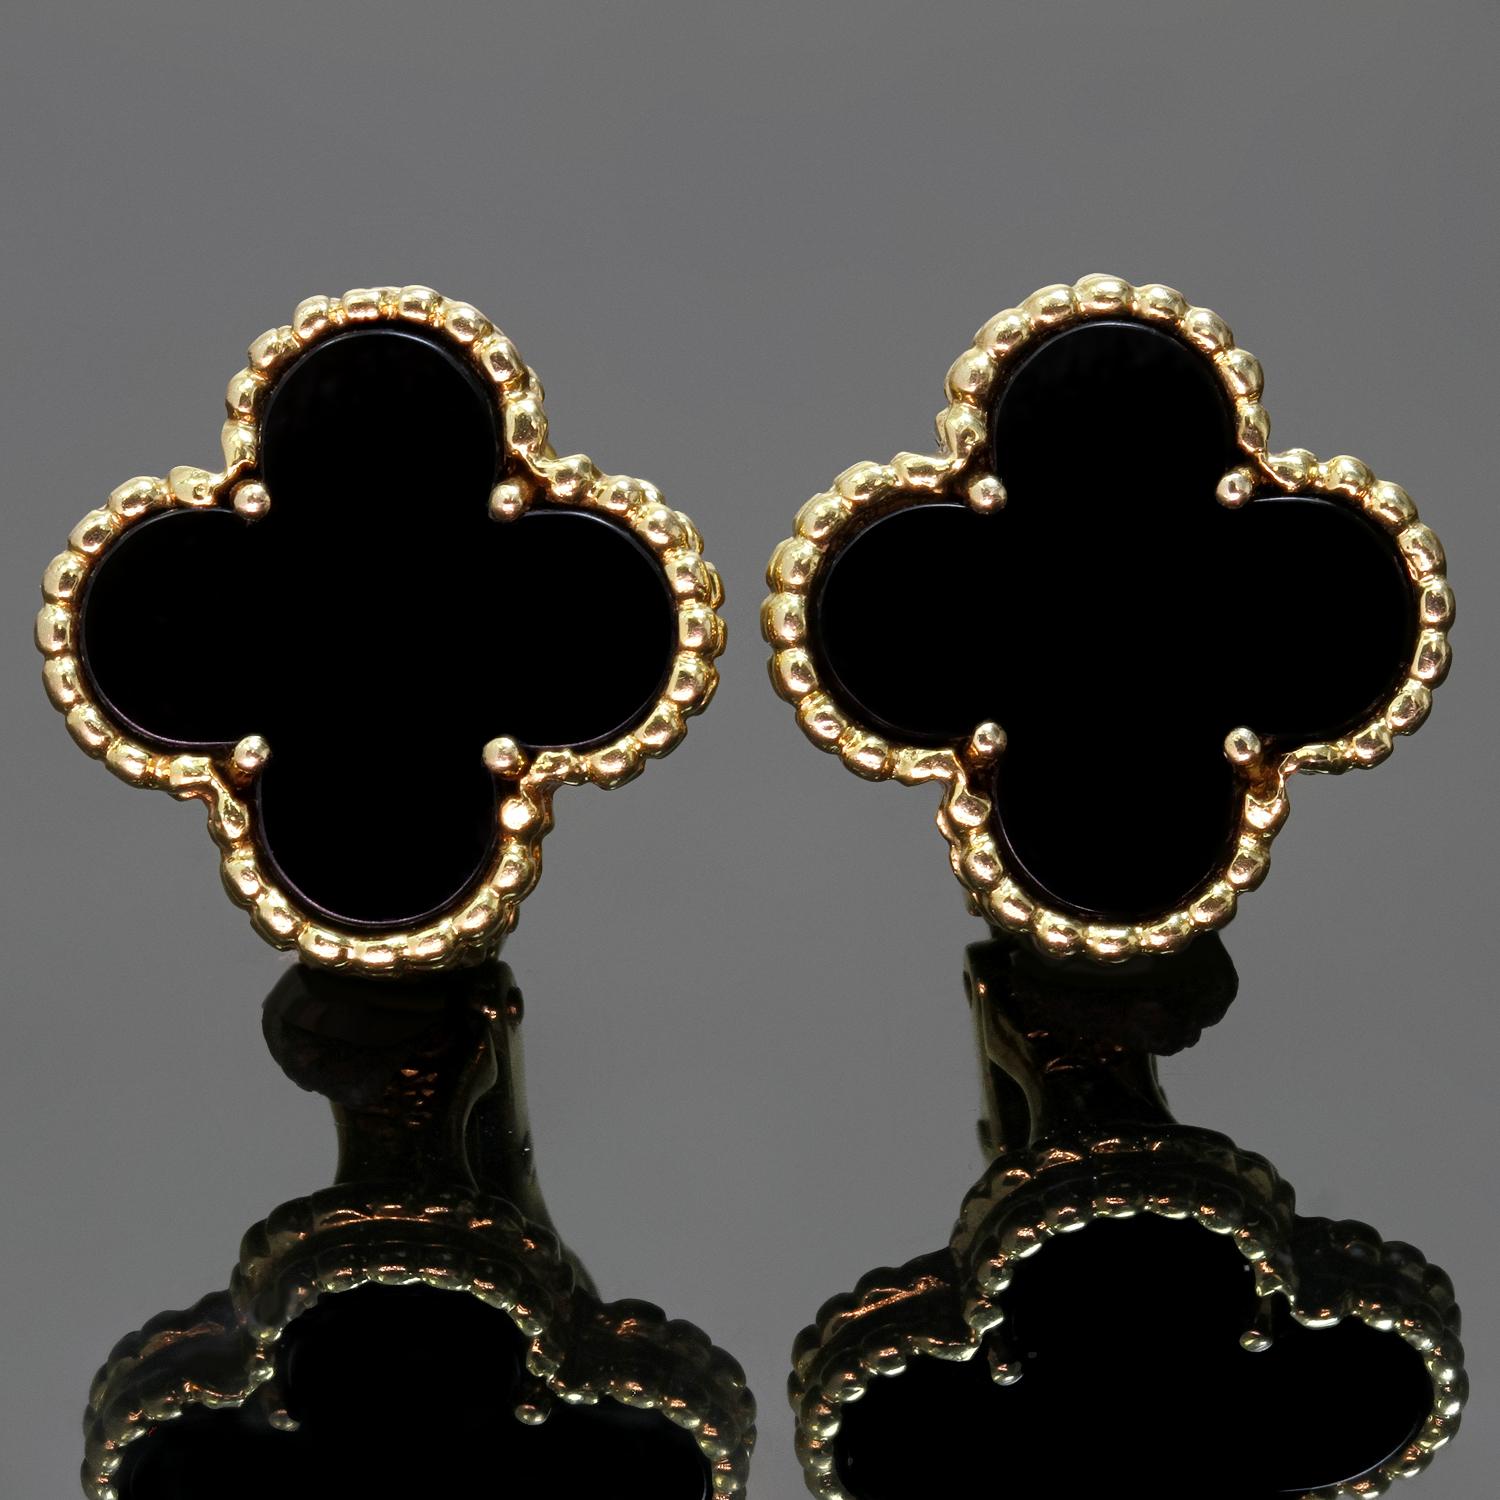 These elegant Van Cleef & Arpels clip-on earrings from the Vintage Alhambra collection are crafted in 18k yellow gold and feature a pair of lucky clover motifs inlaid with black onyx round bead settings. Made in France circa 2000s. Measurements: